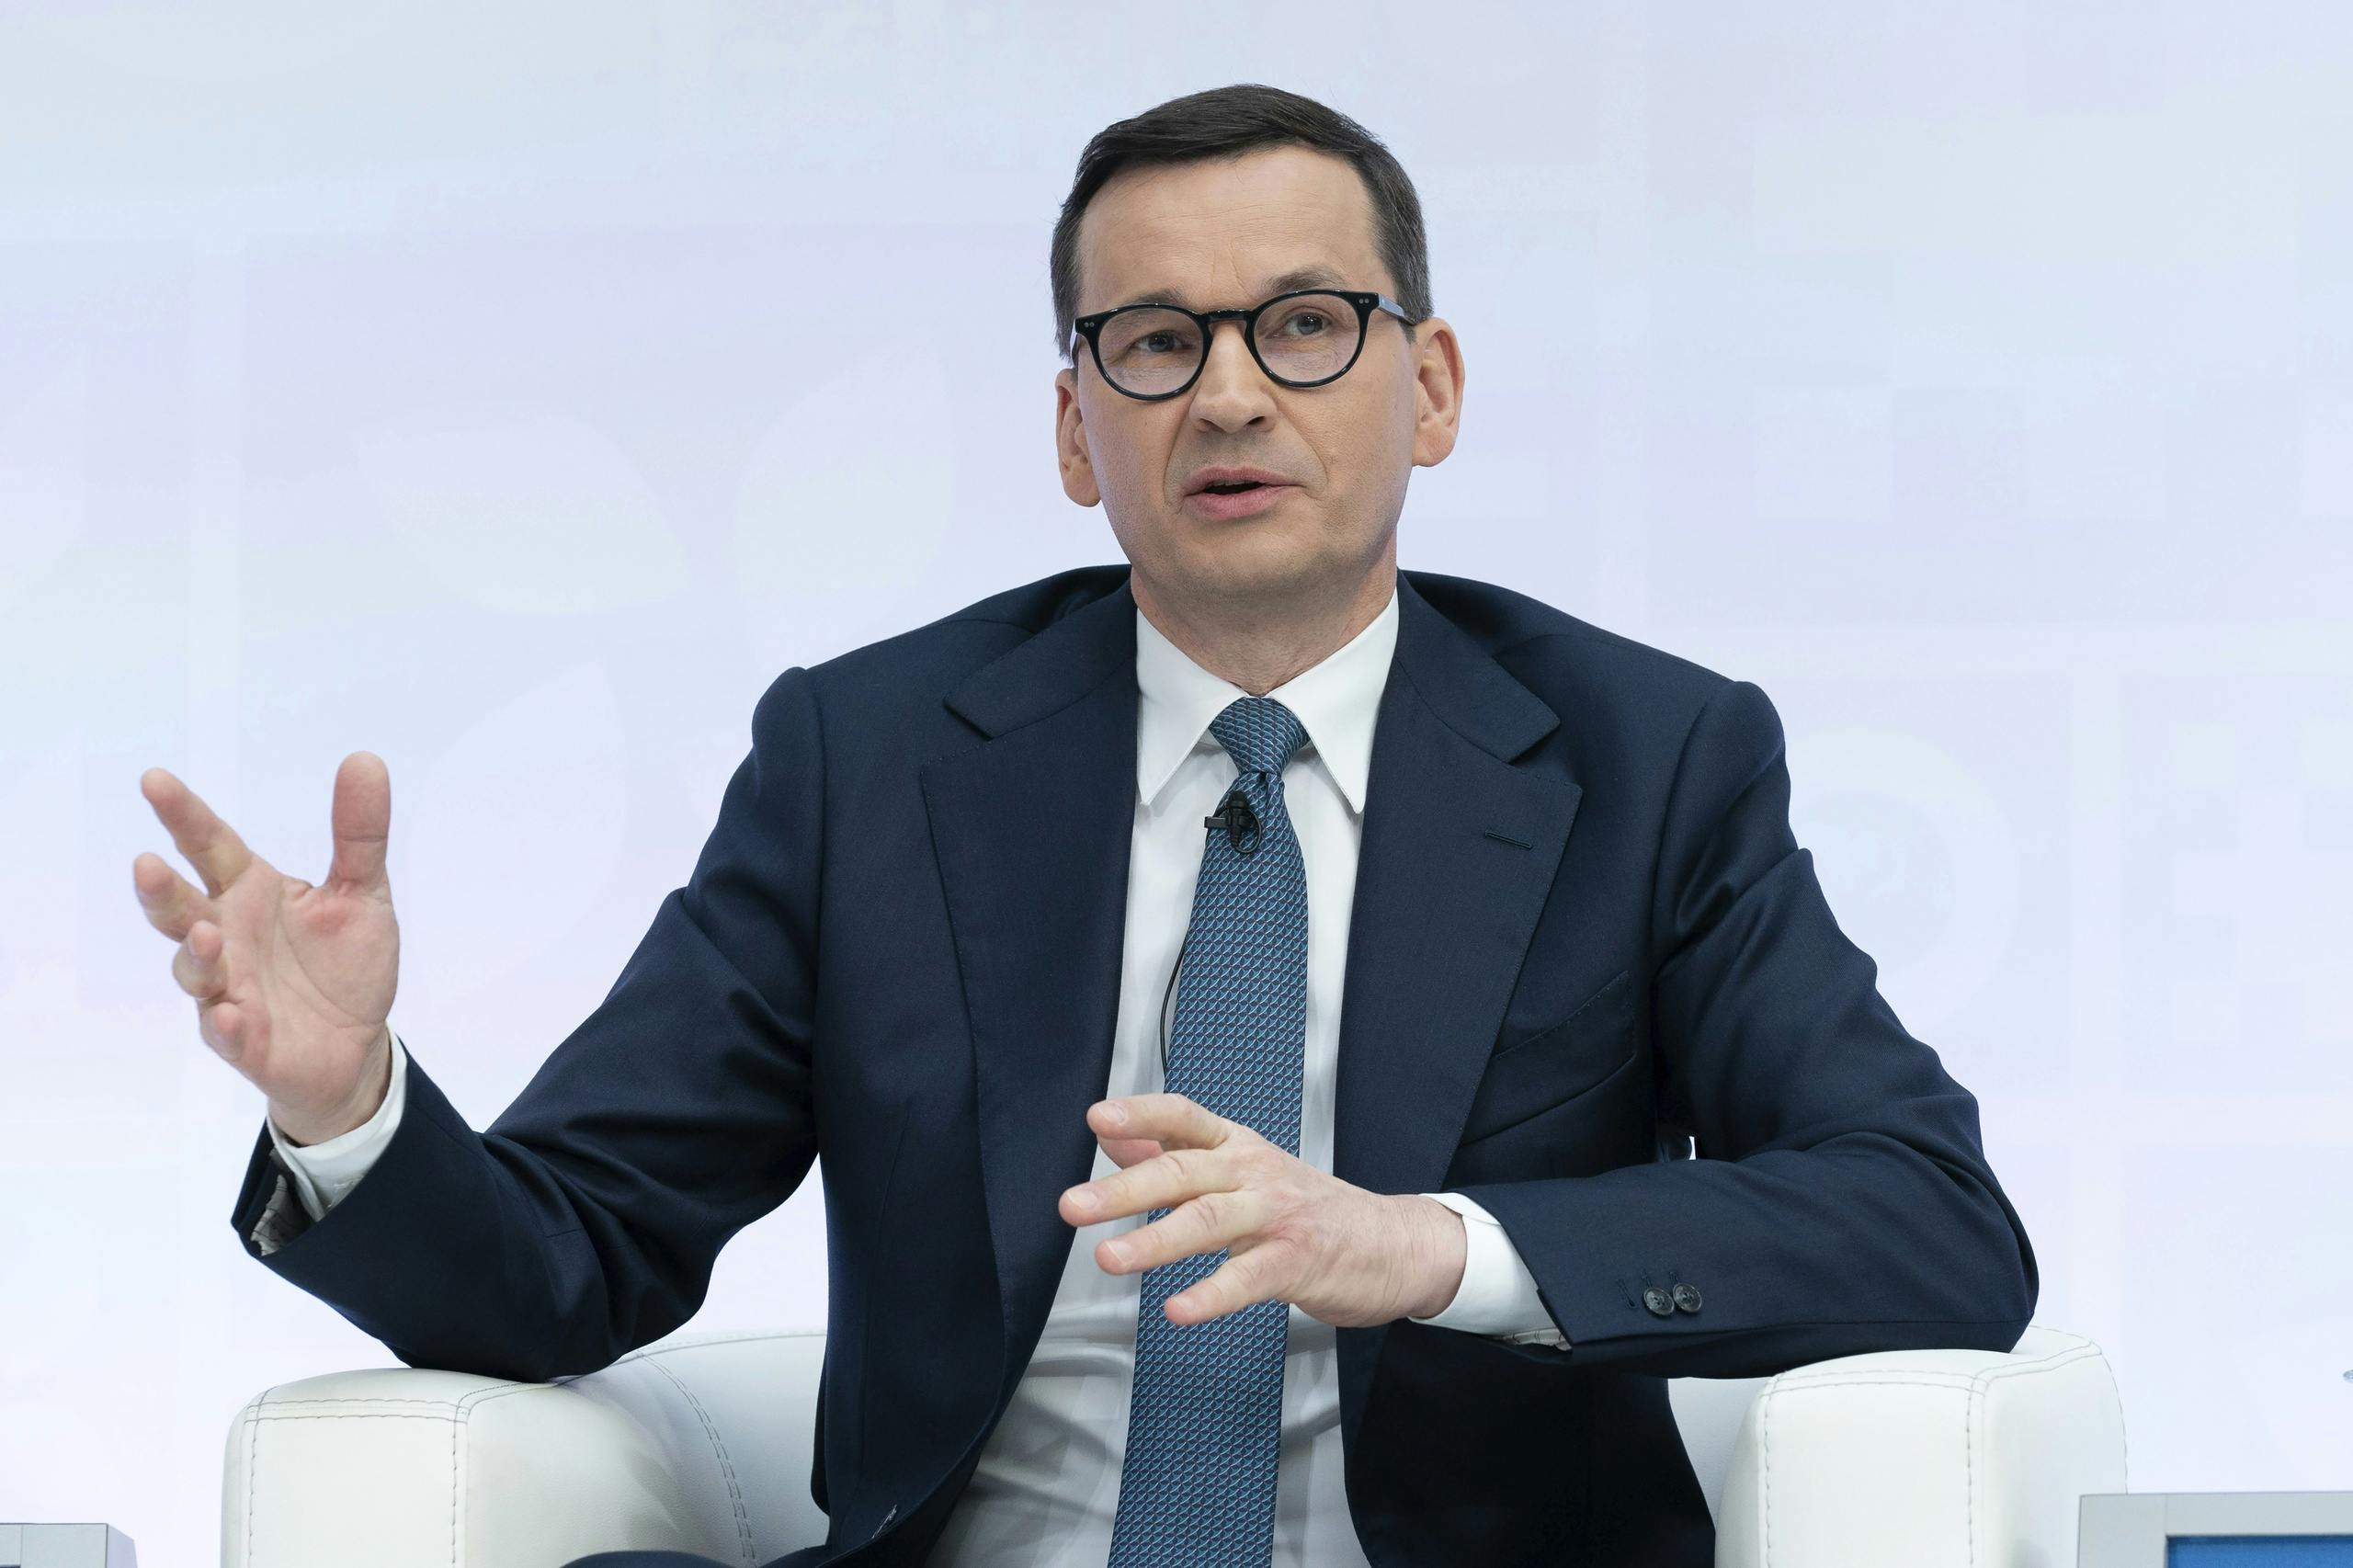 Polish Prime Minister: “European support for farmers comes too late”